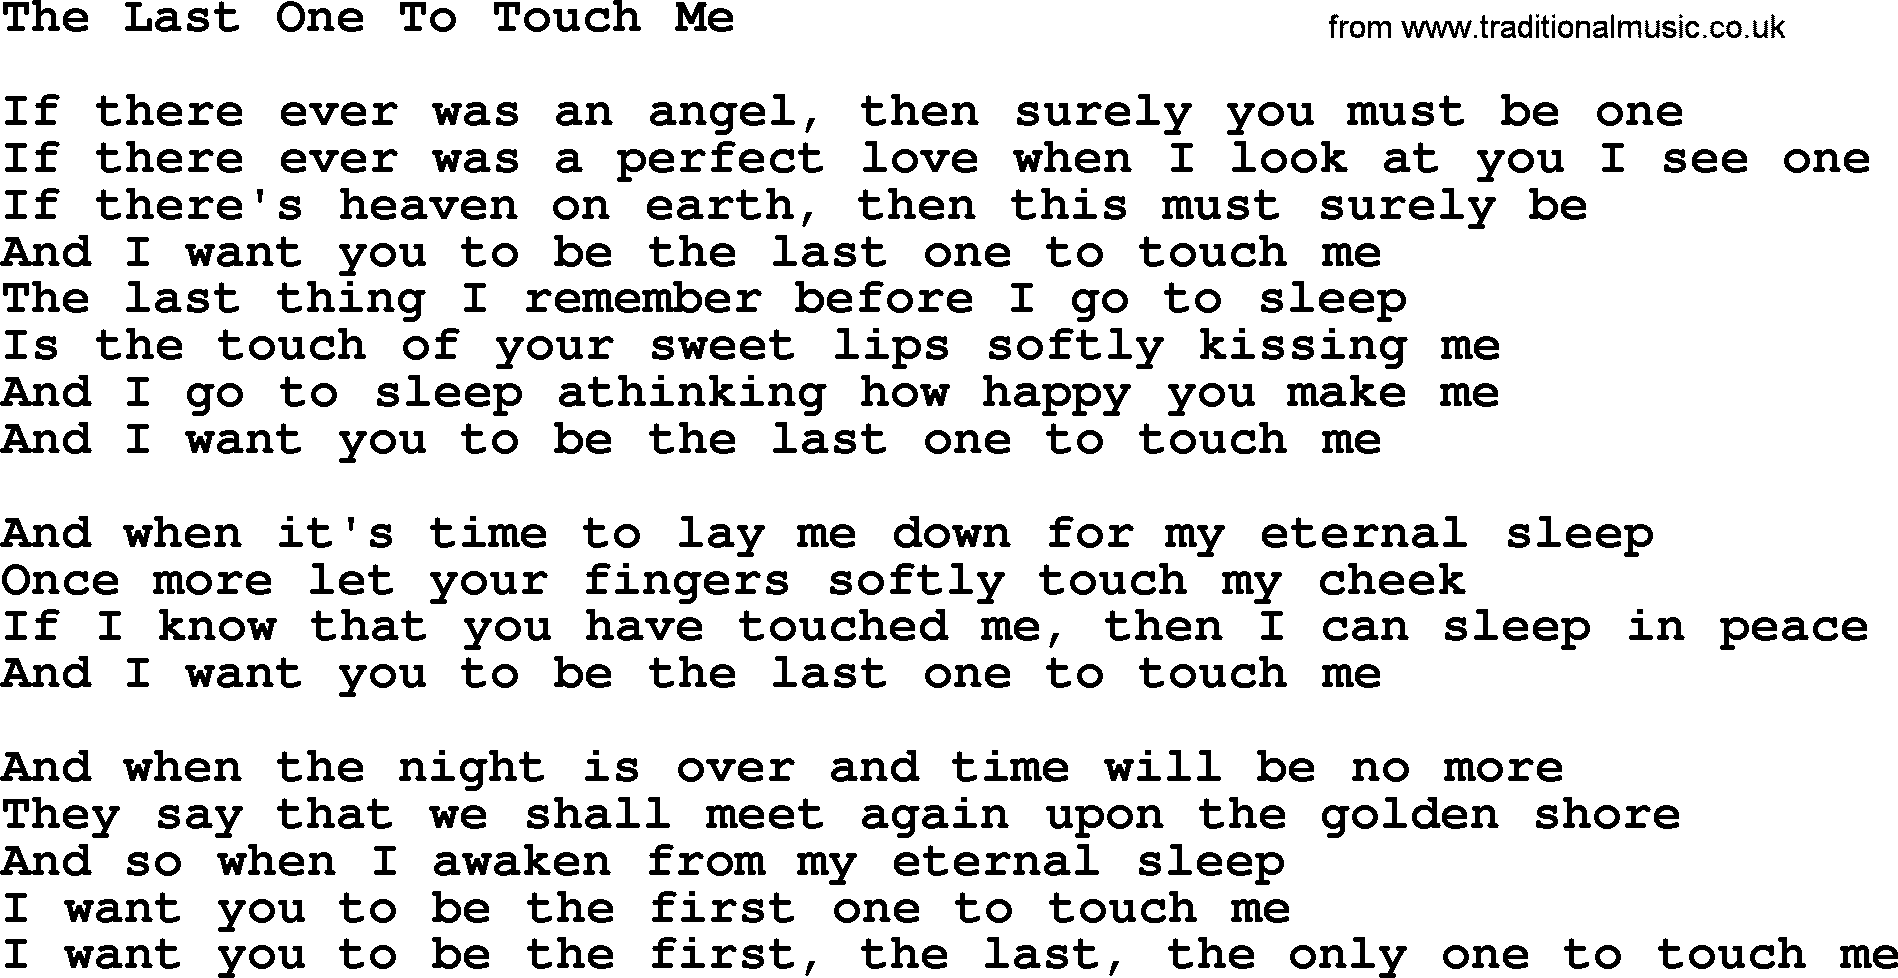 Dolly Parton song The Last One To Touch Me.txt lyrics